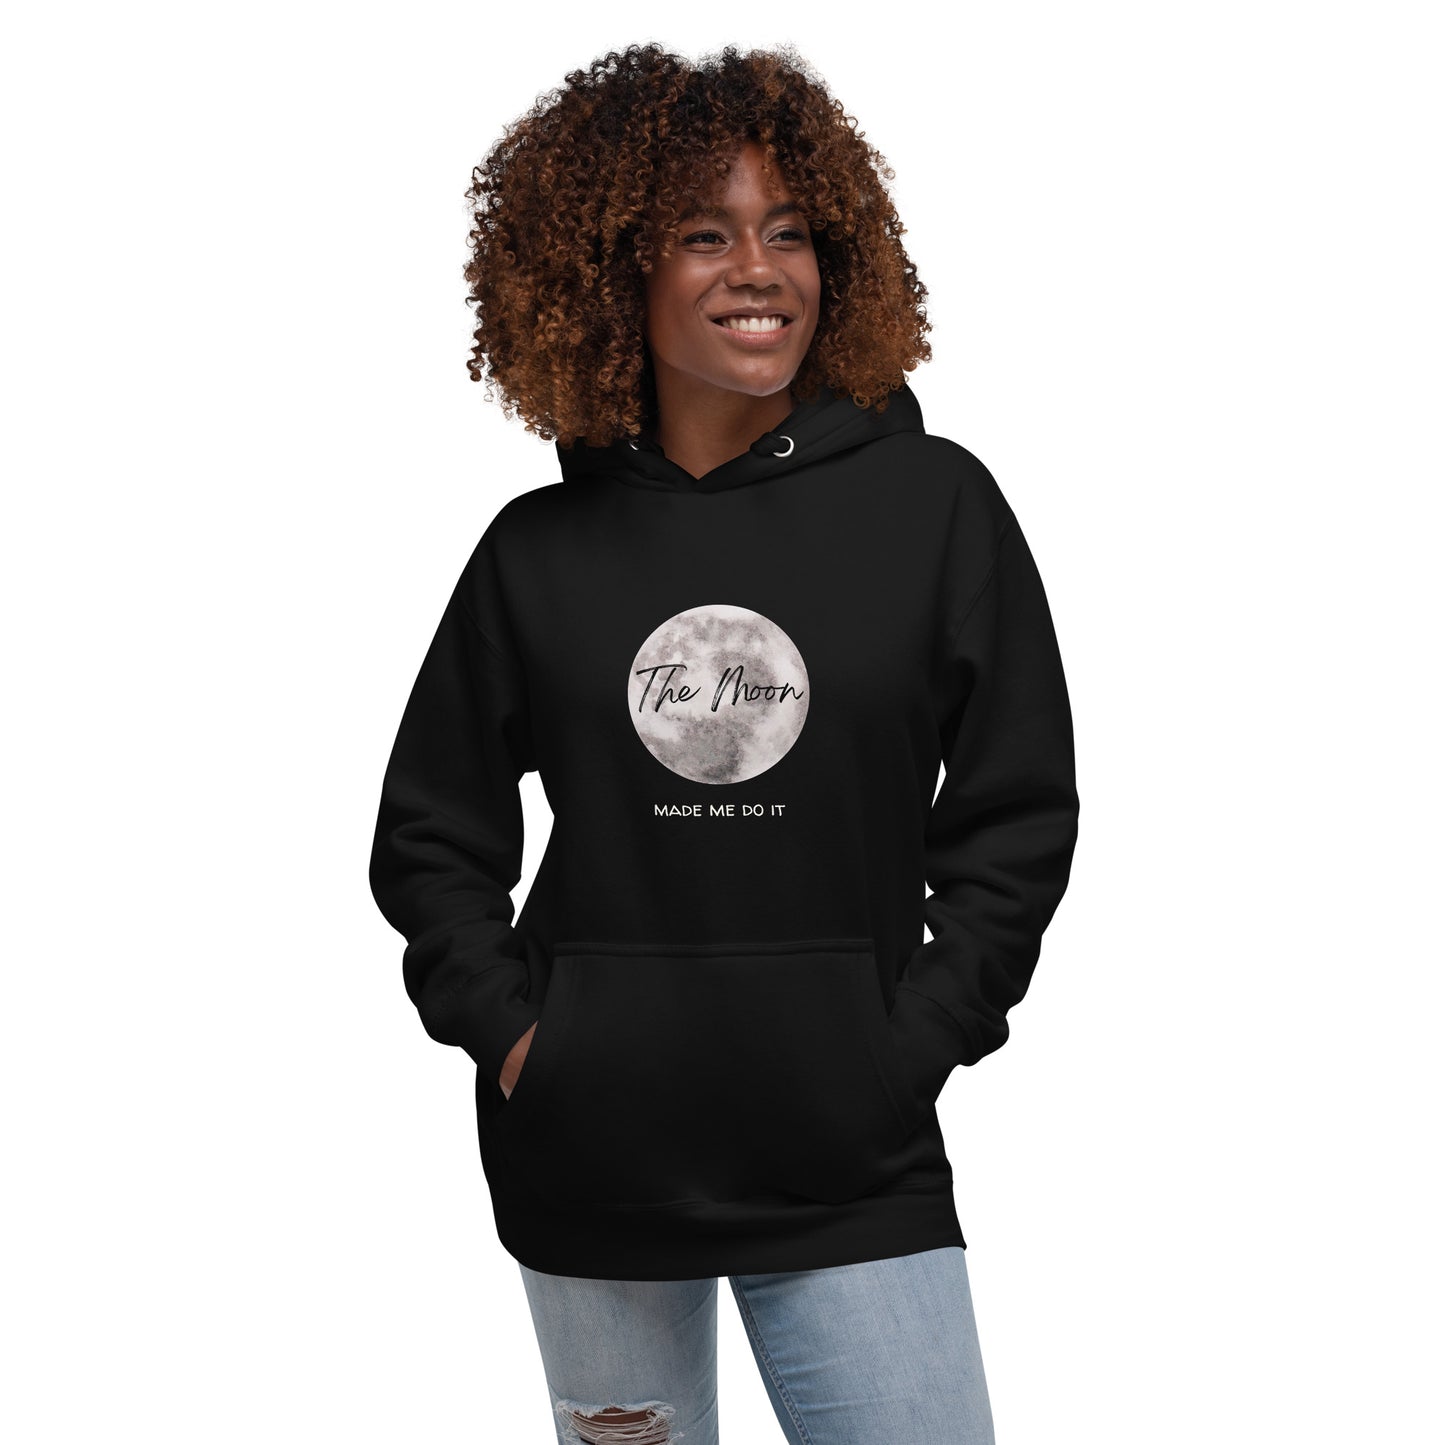 Unisex Hoodie The Moon made me do it